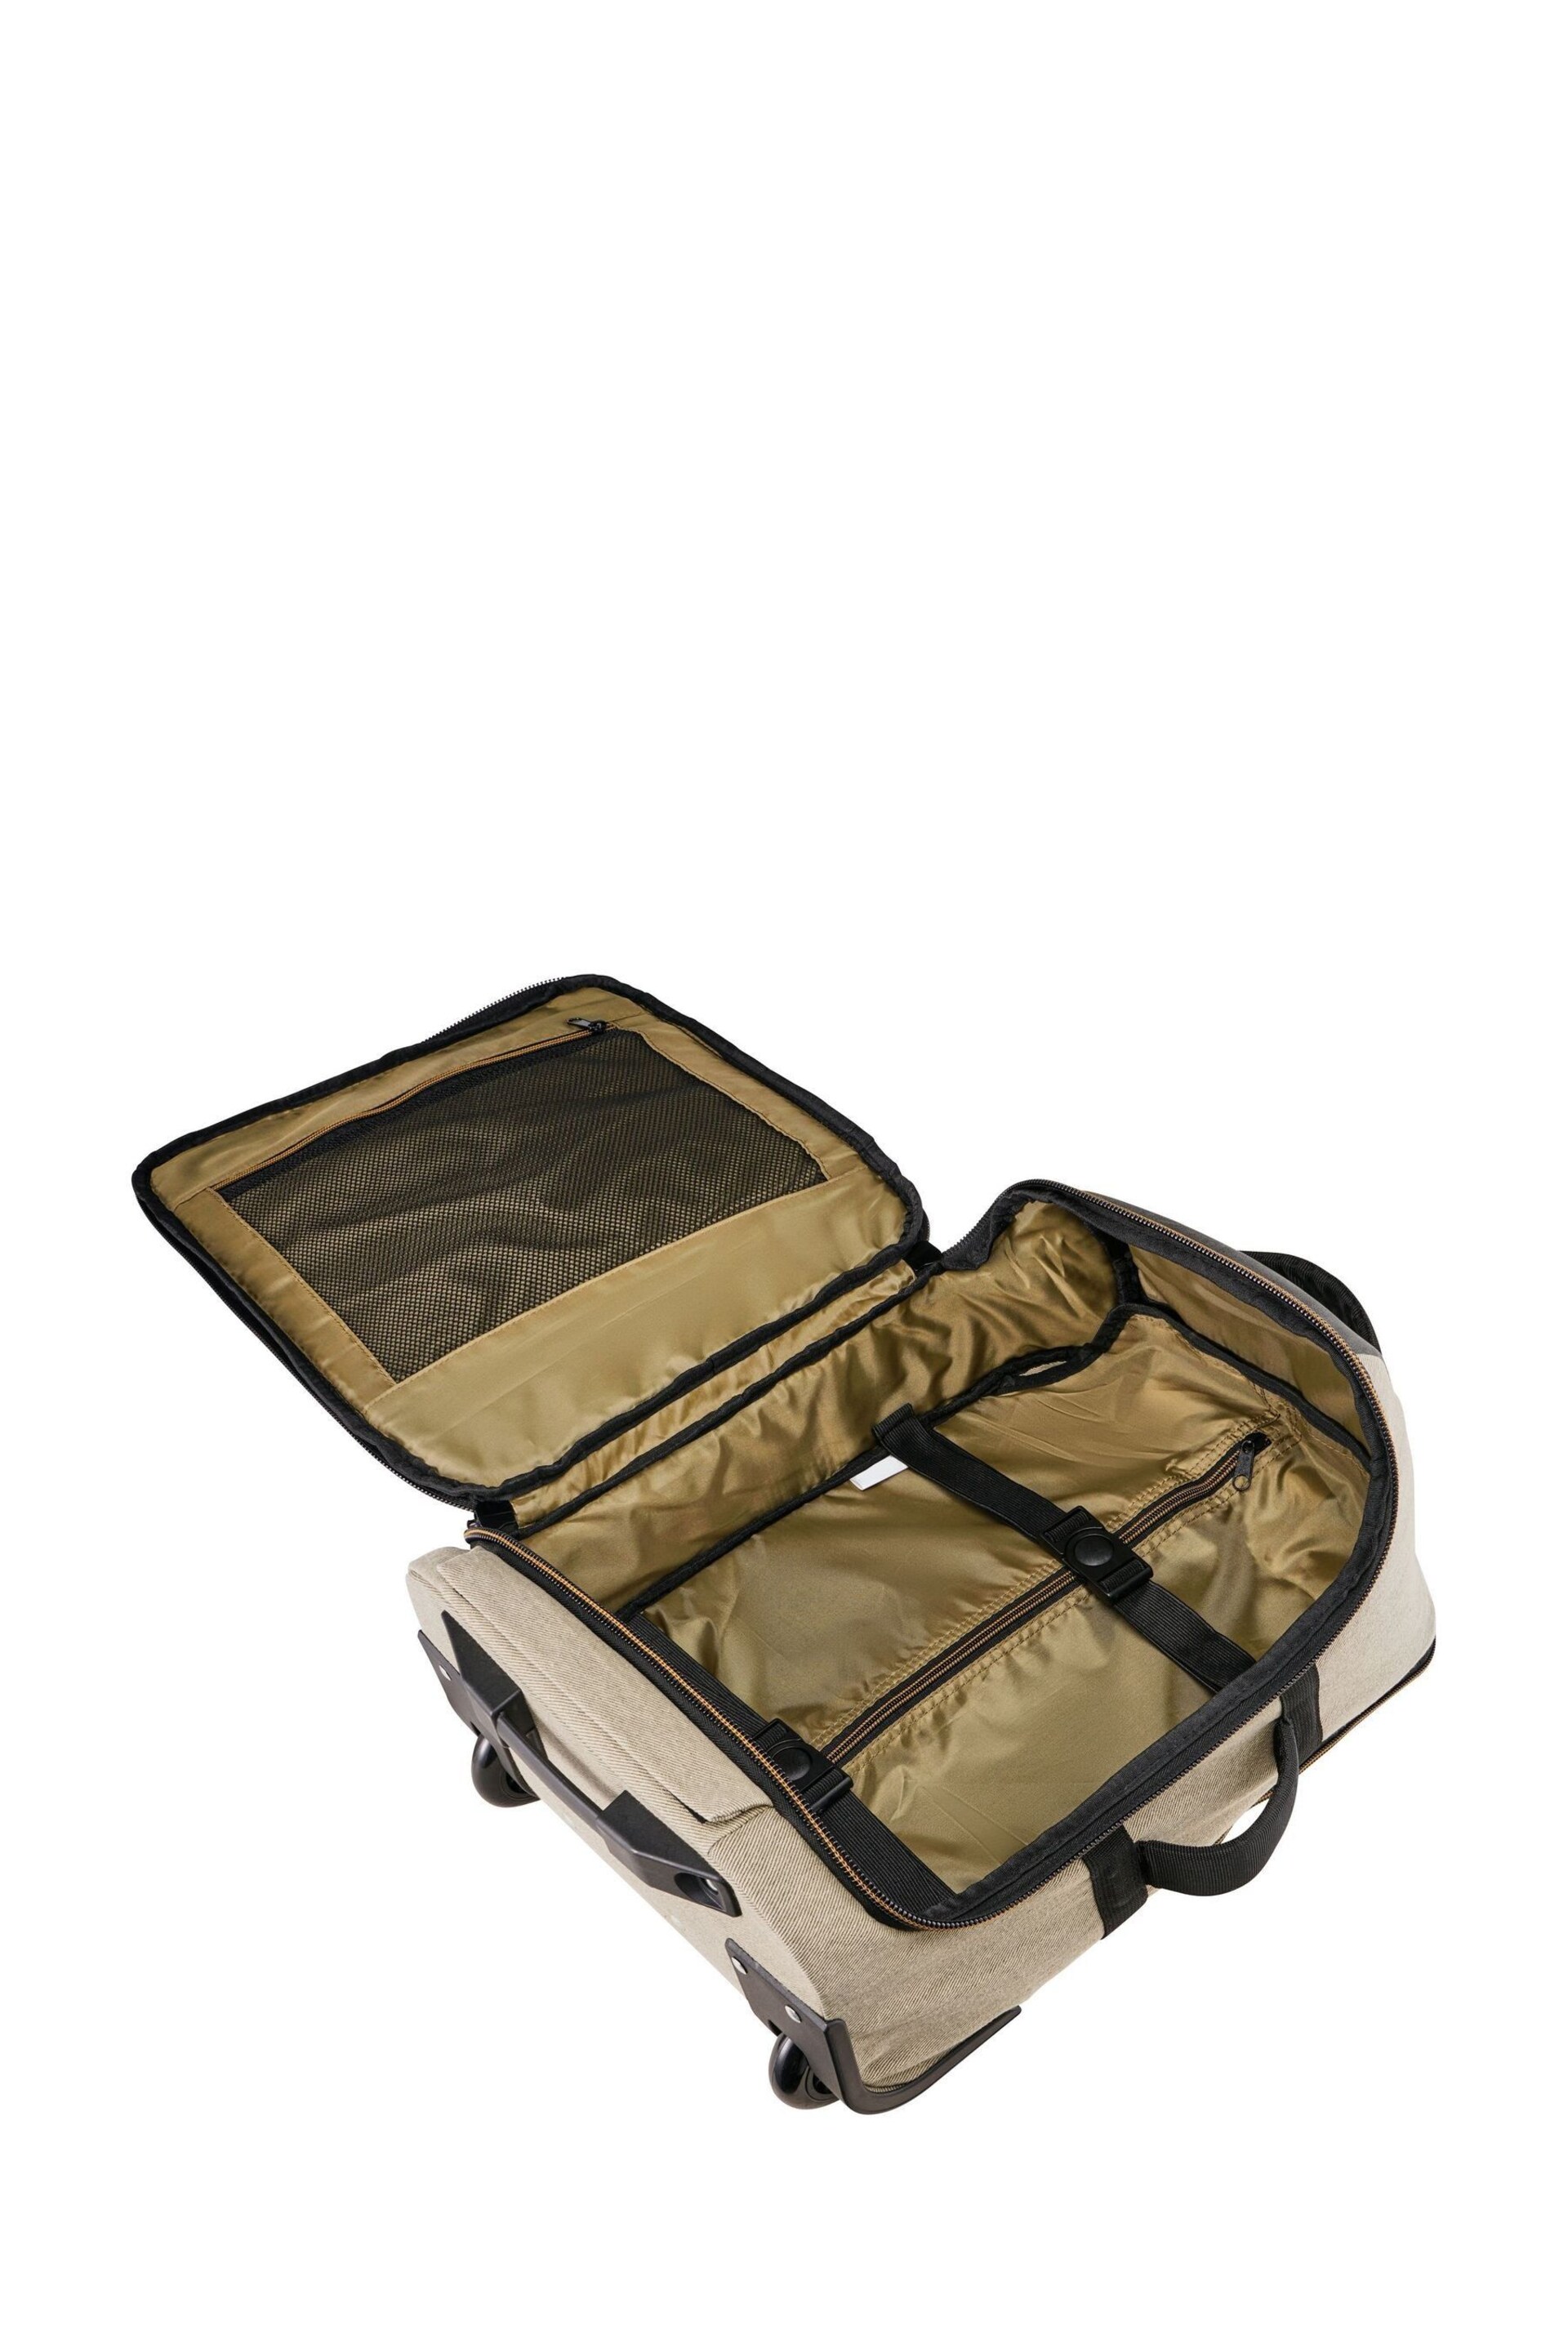 Cabin Max Manhattan Hybrid 30 Litre 45x36x20cm Backpack / Trolley Easyjet Carry on Hand Luggage - Image 7 of 10